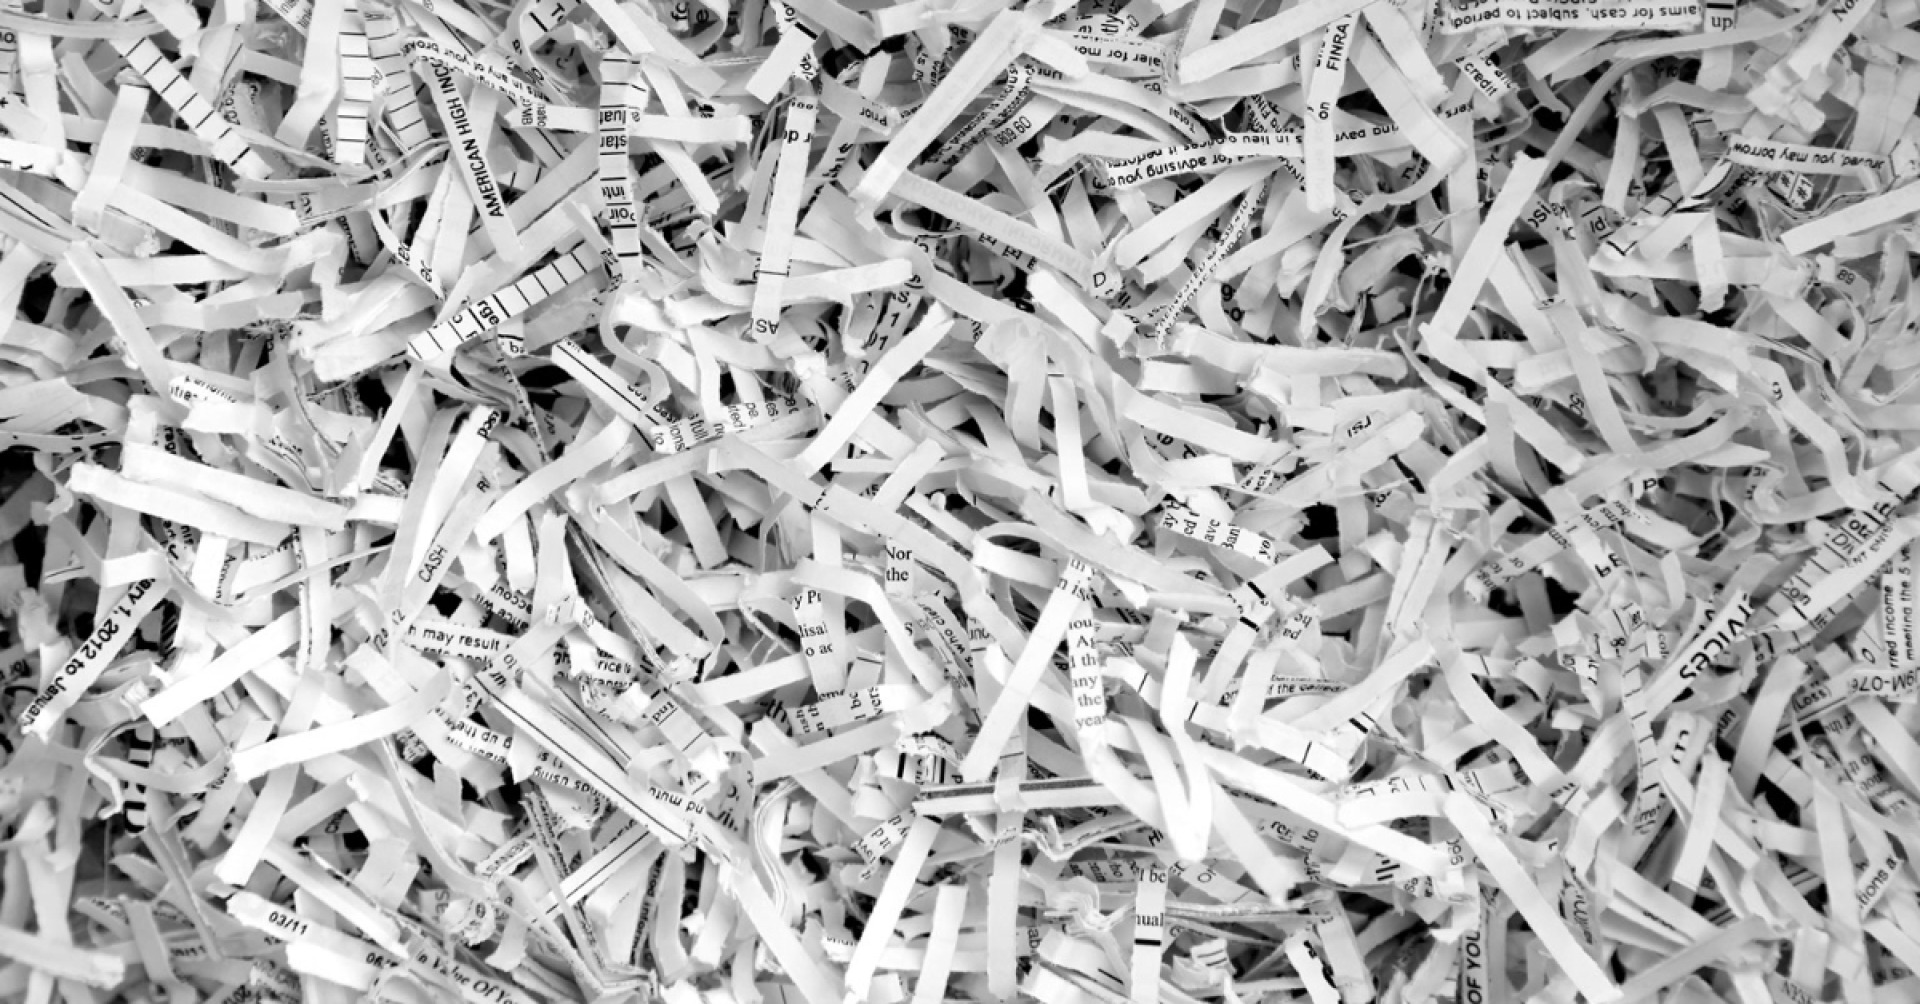 Drive Through Paper Shredding Event May 21, 2022 Unleash Council Bluffs